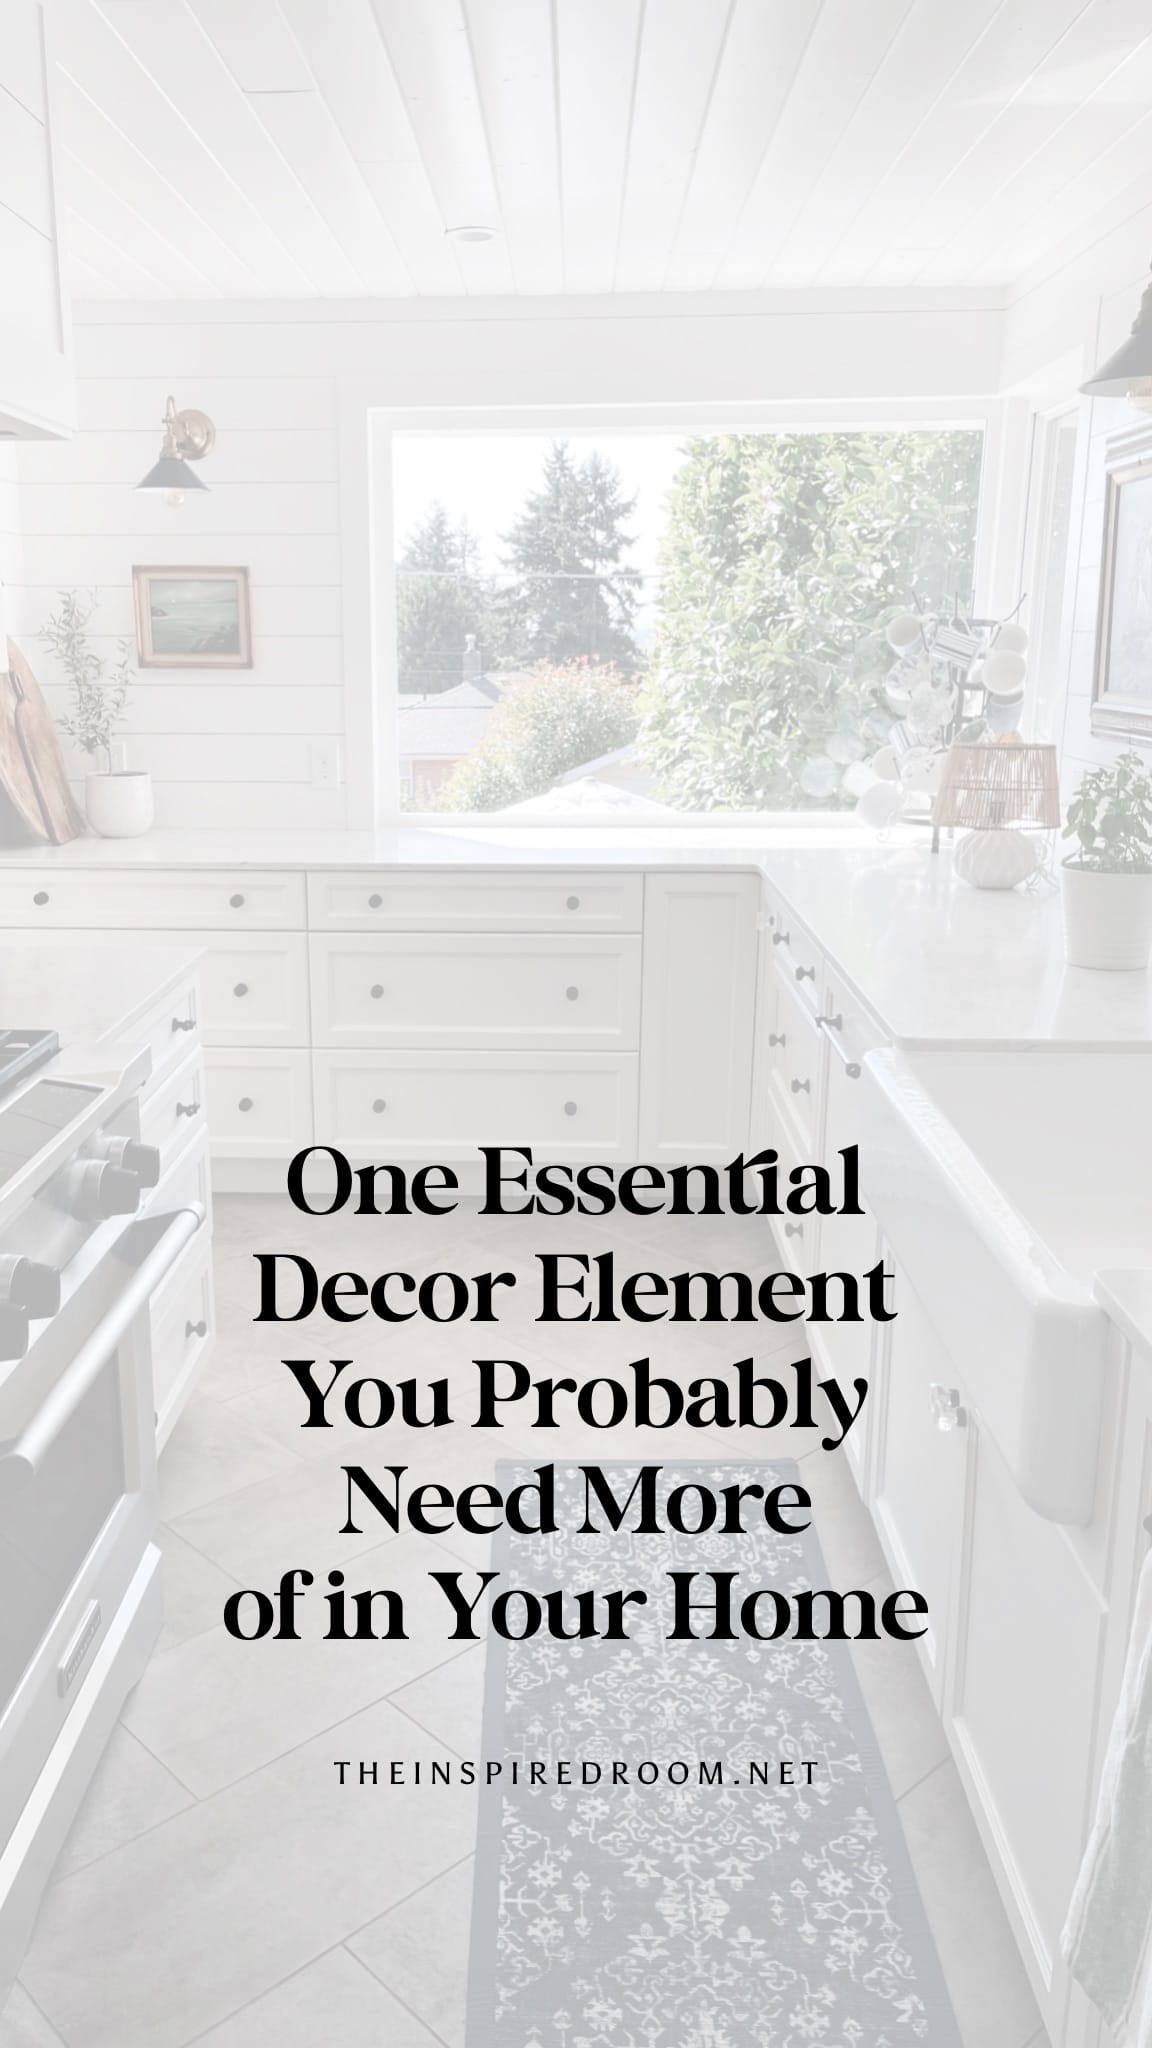 One Essential Decor Element You Probably Need More of In Your Home